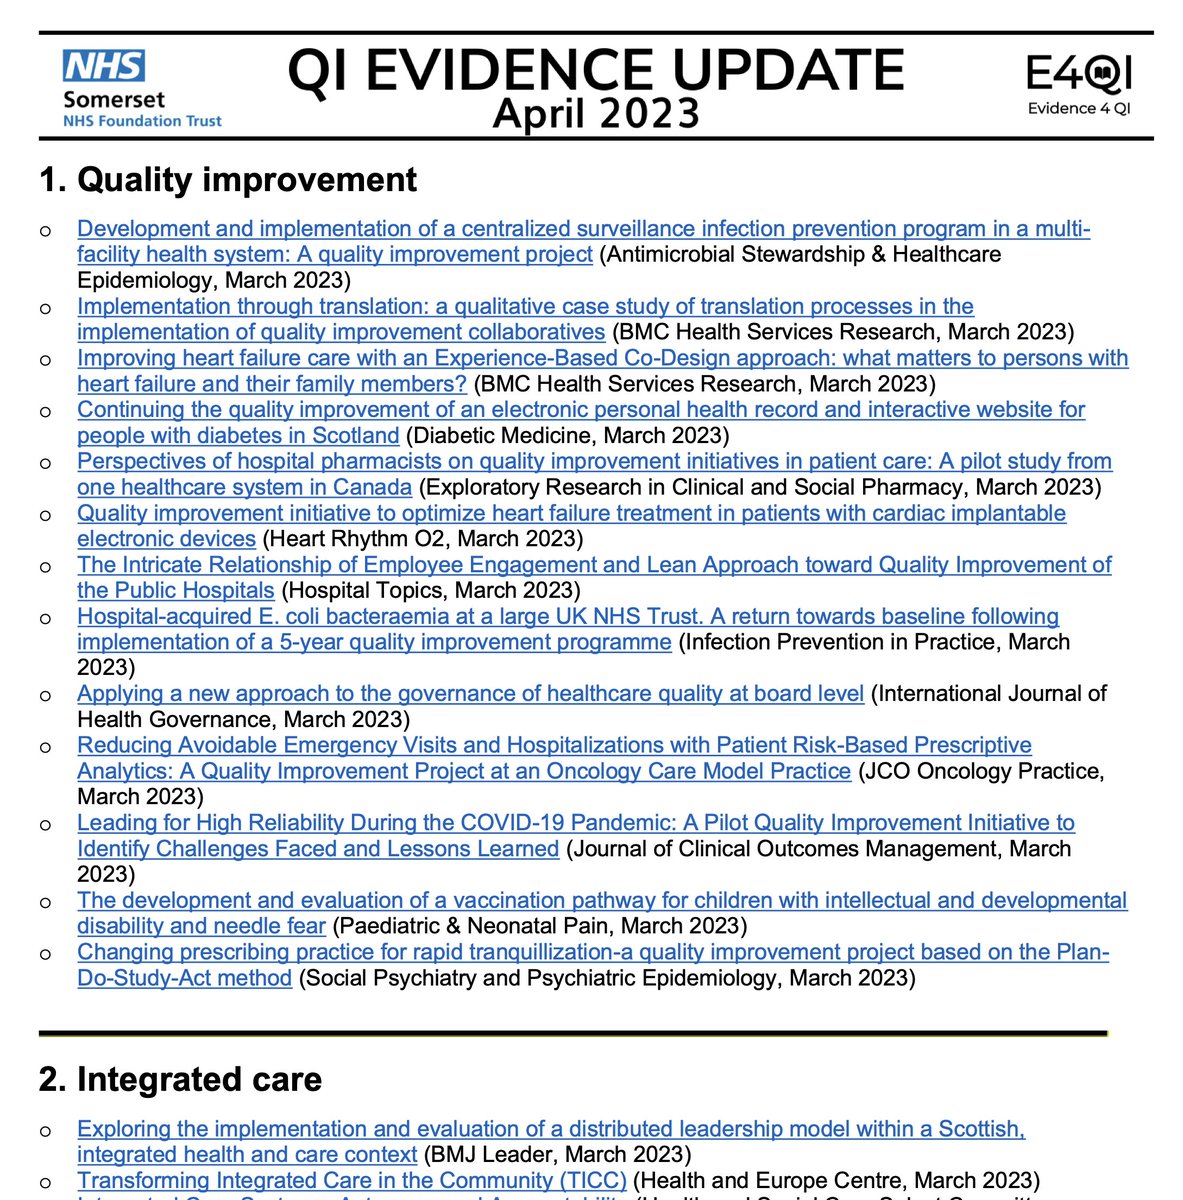 Great 📚 library of must-read research and updates collated by @improvjess & @andreadgibbons 📥 Download 👉 fabnhsstuff.net/fab-stuff/QIEv… You can edit it and share it with your teams. Here's what it covers: 🔷 Quality improvement 🔷 Integrated care 🔷 Patients & people 🔷 NHS…